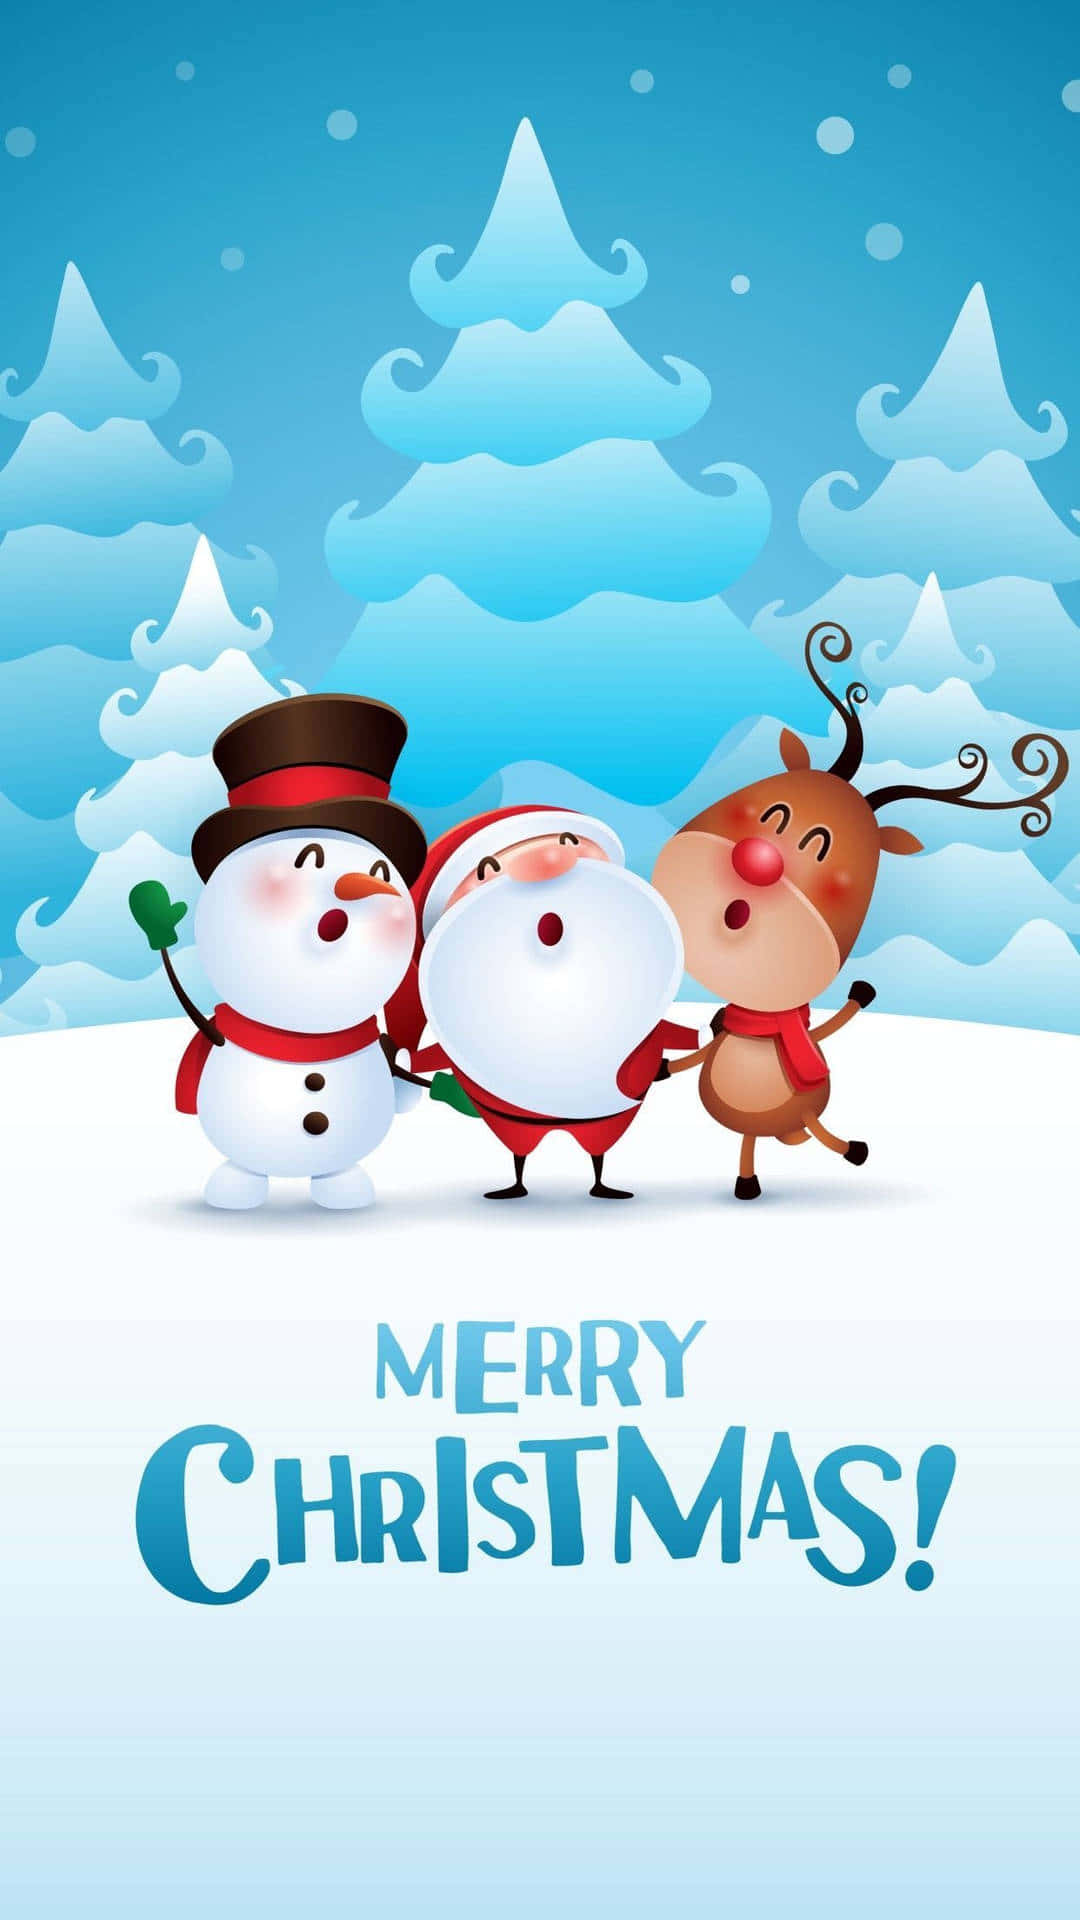 Celebrate the Holidays With Cute, Simple Christmas Wallpaper